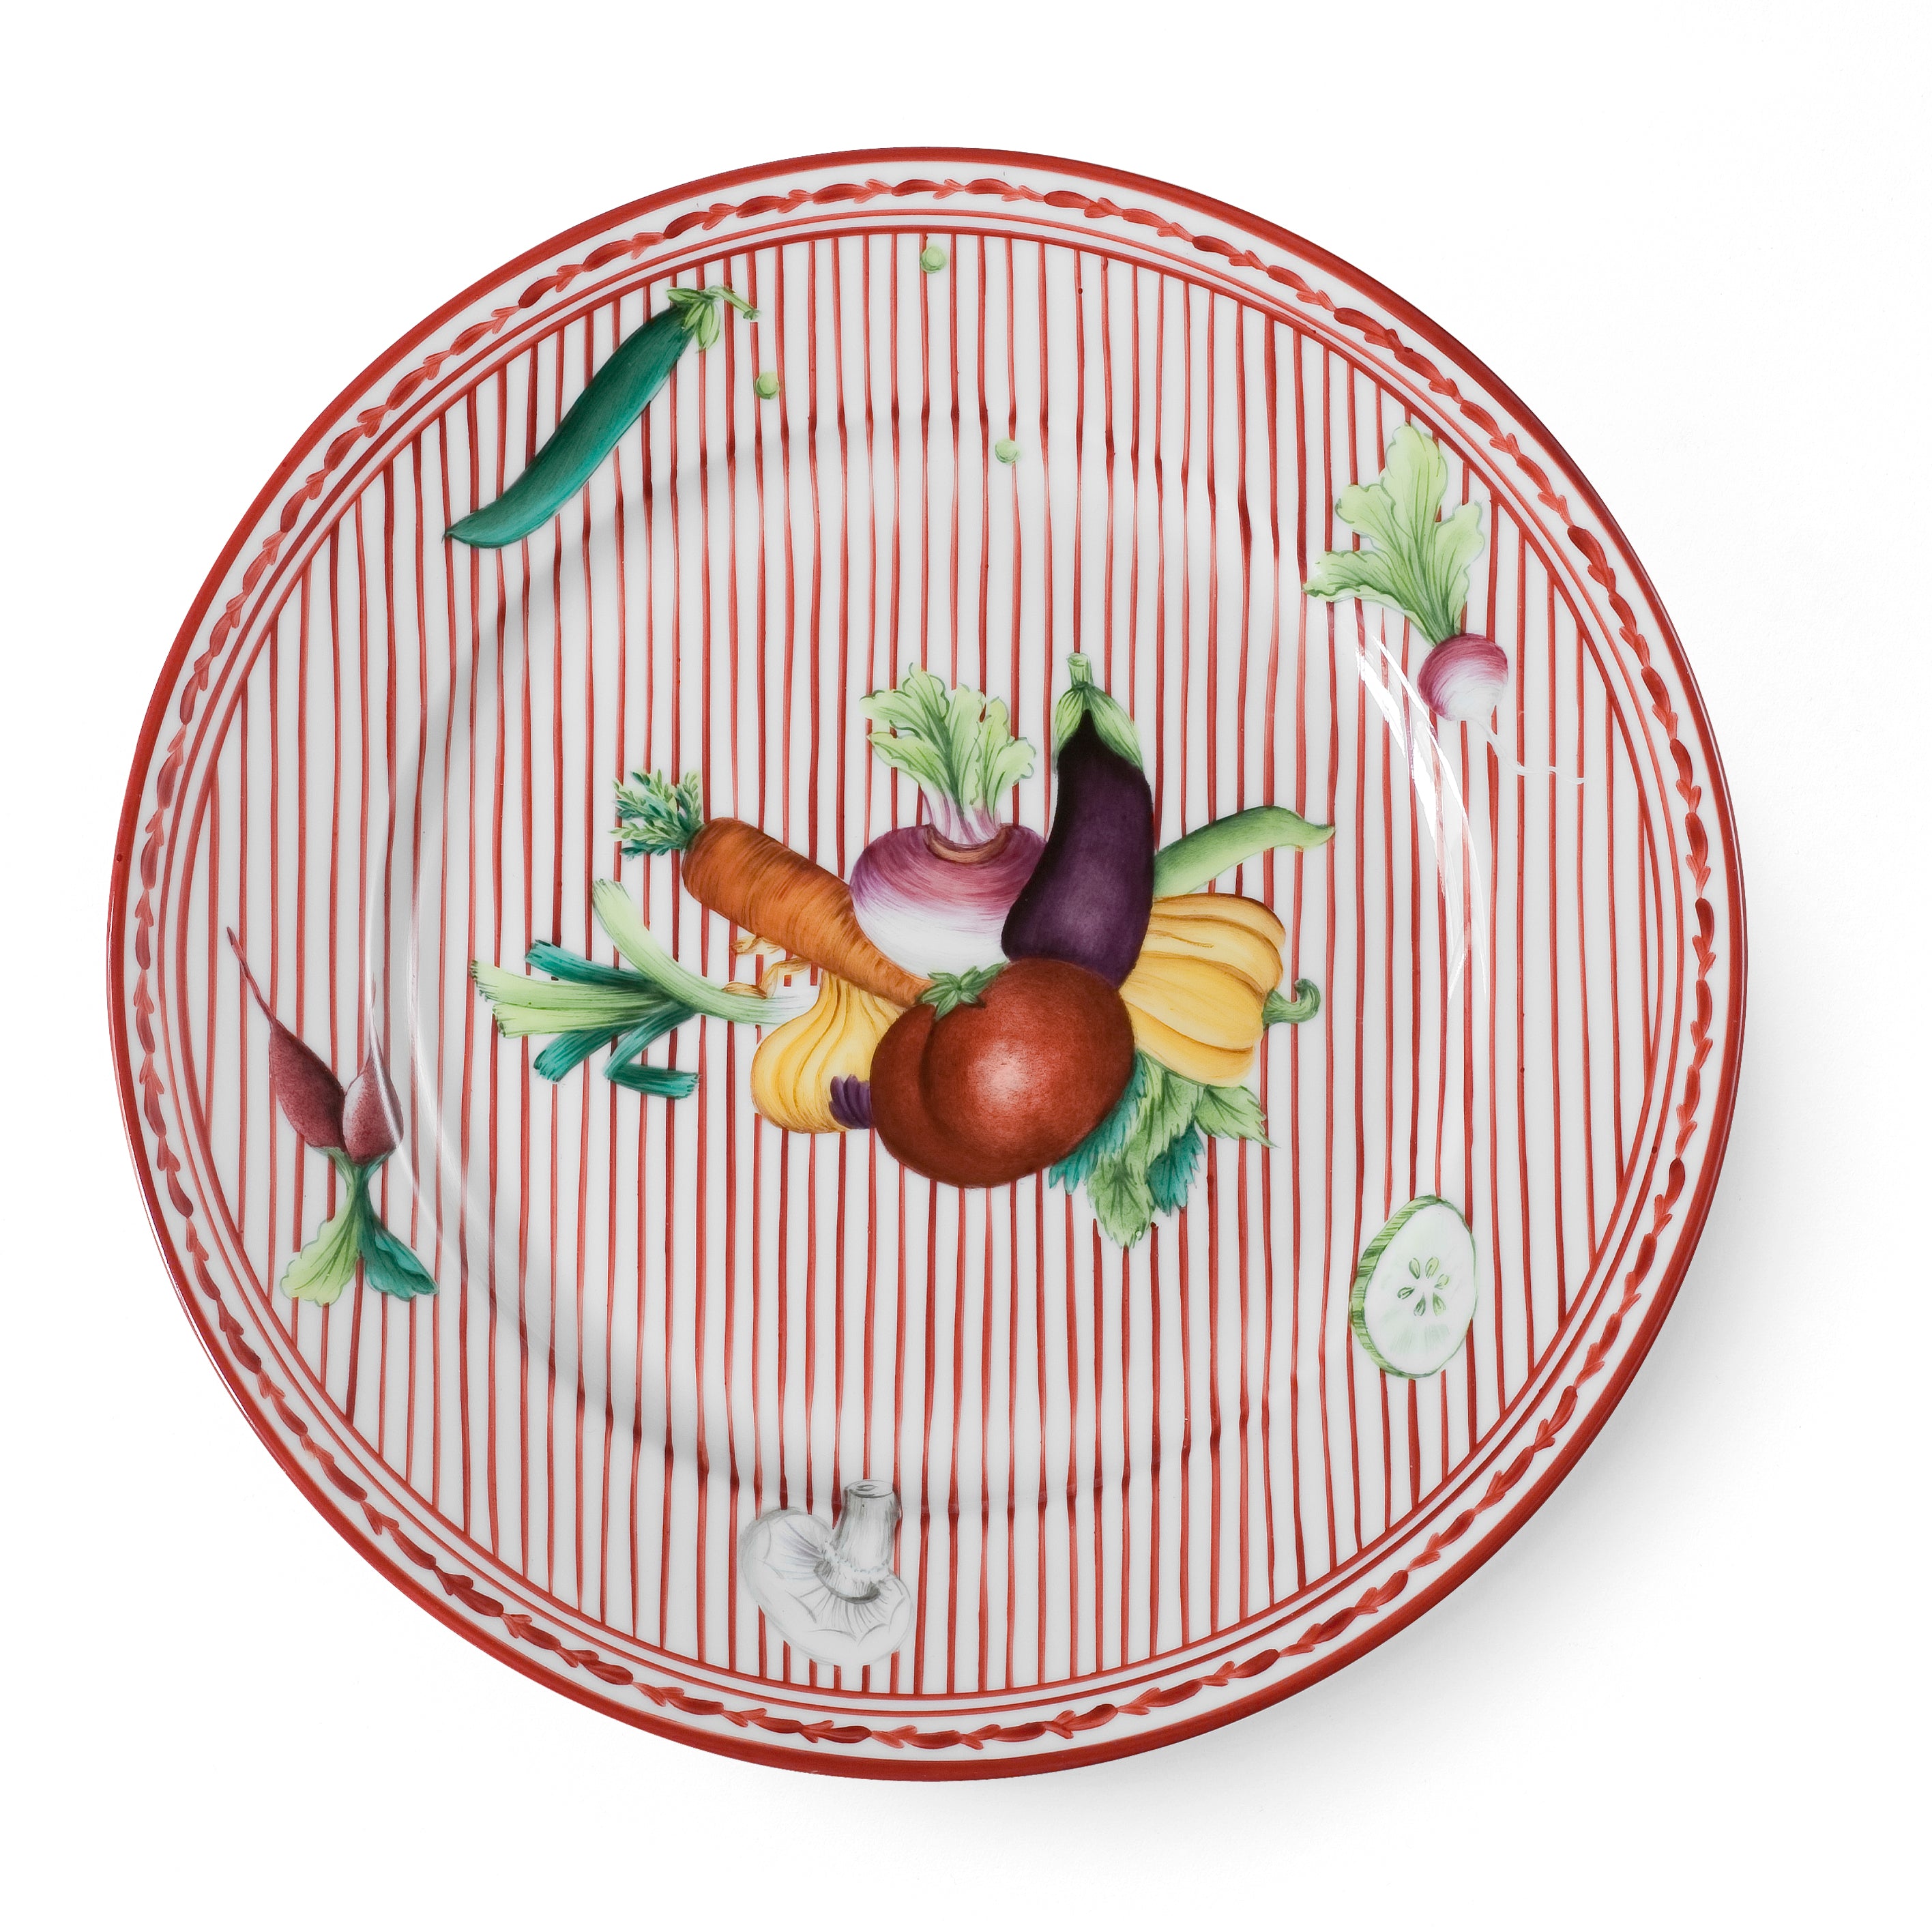 Potager in Red - Assiette plate